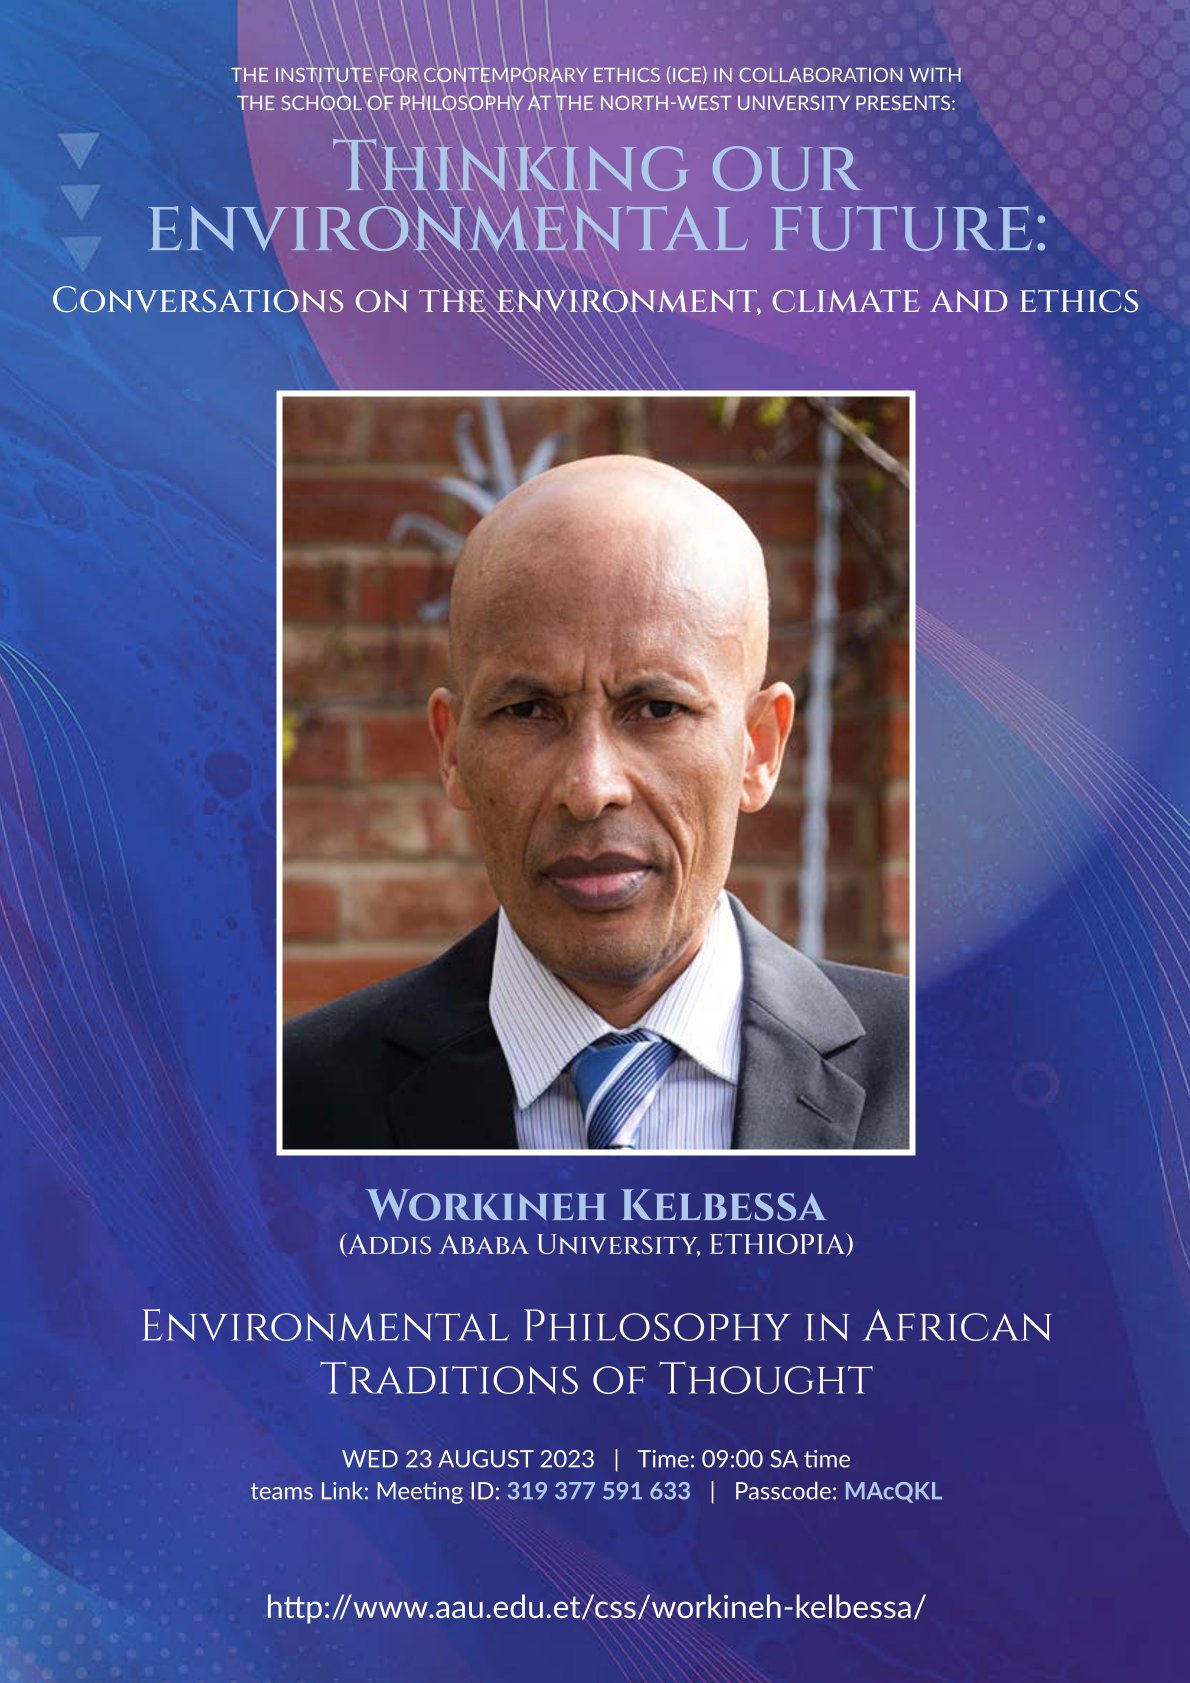 Thinking our environmental future: Conversations on the environment, climate and ethics